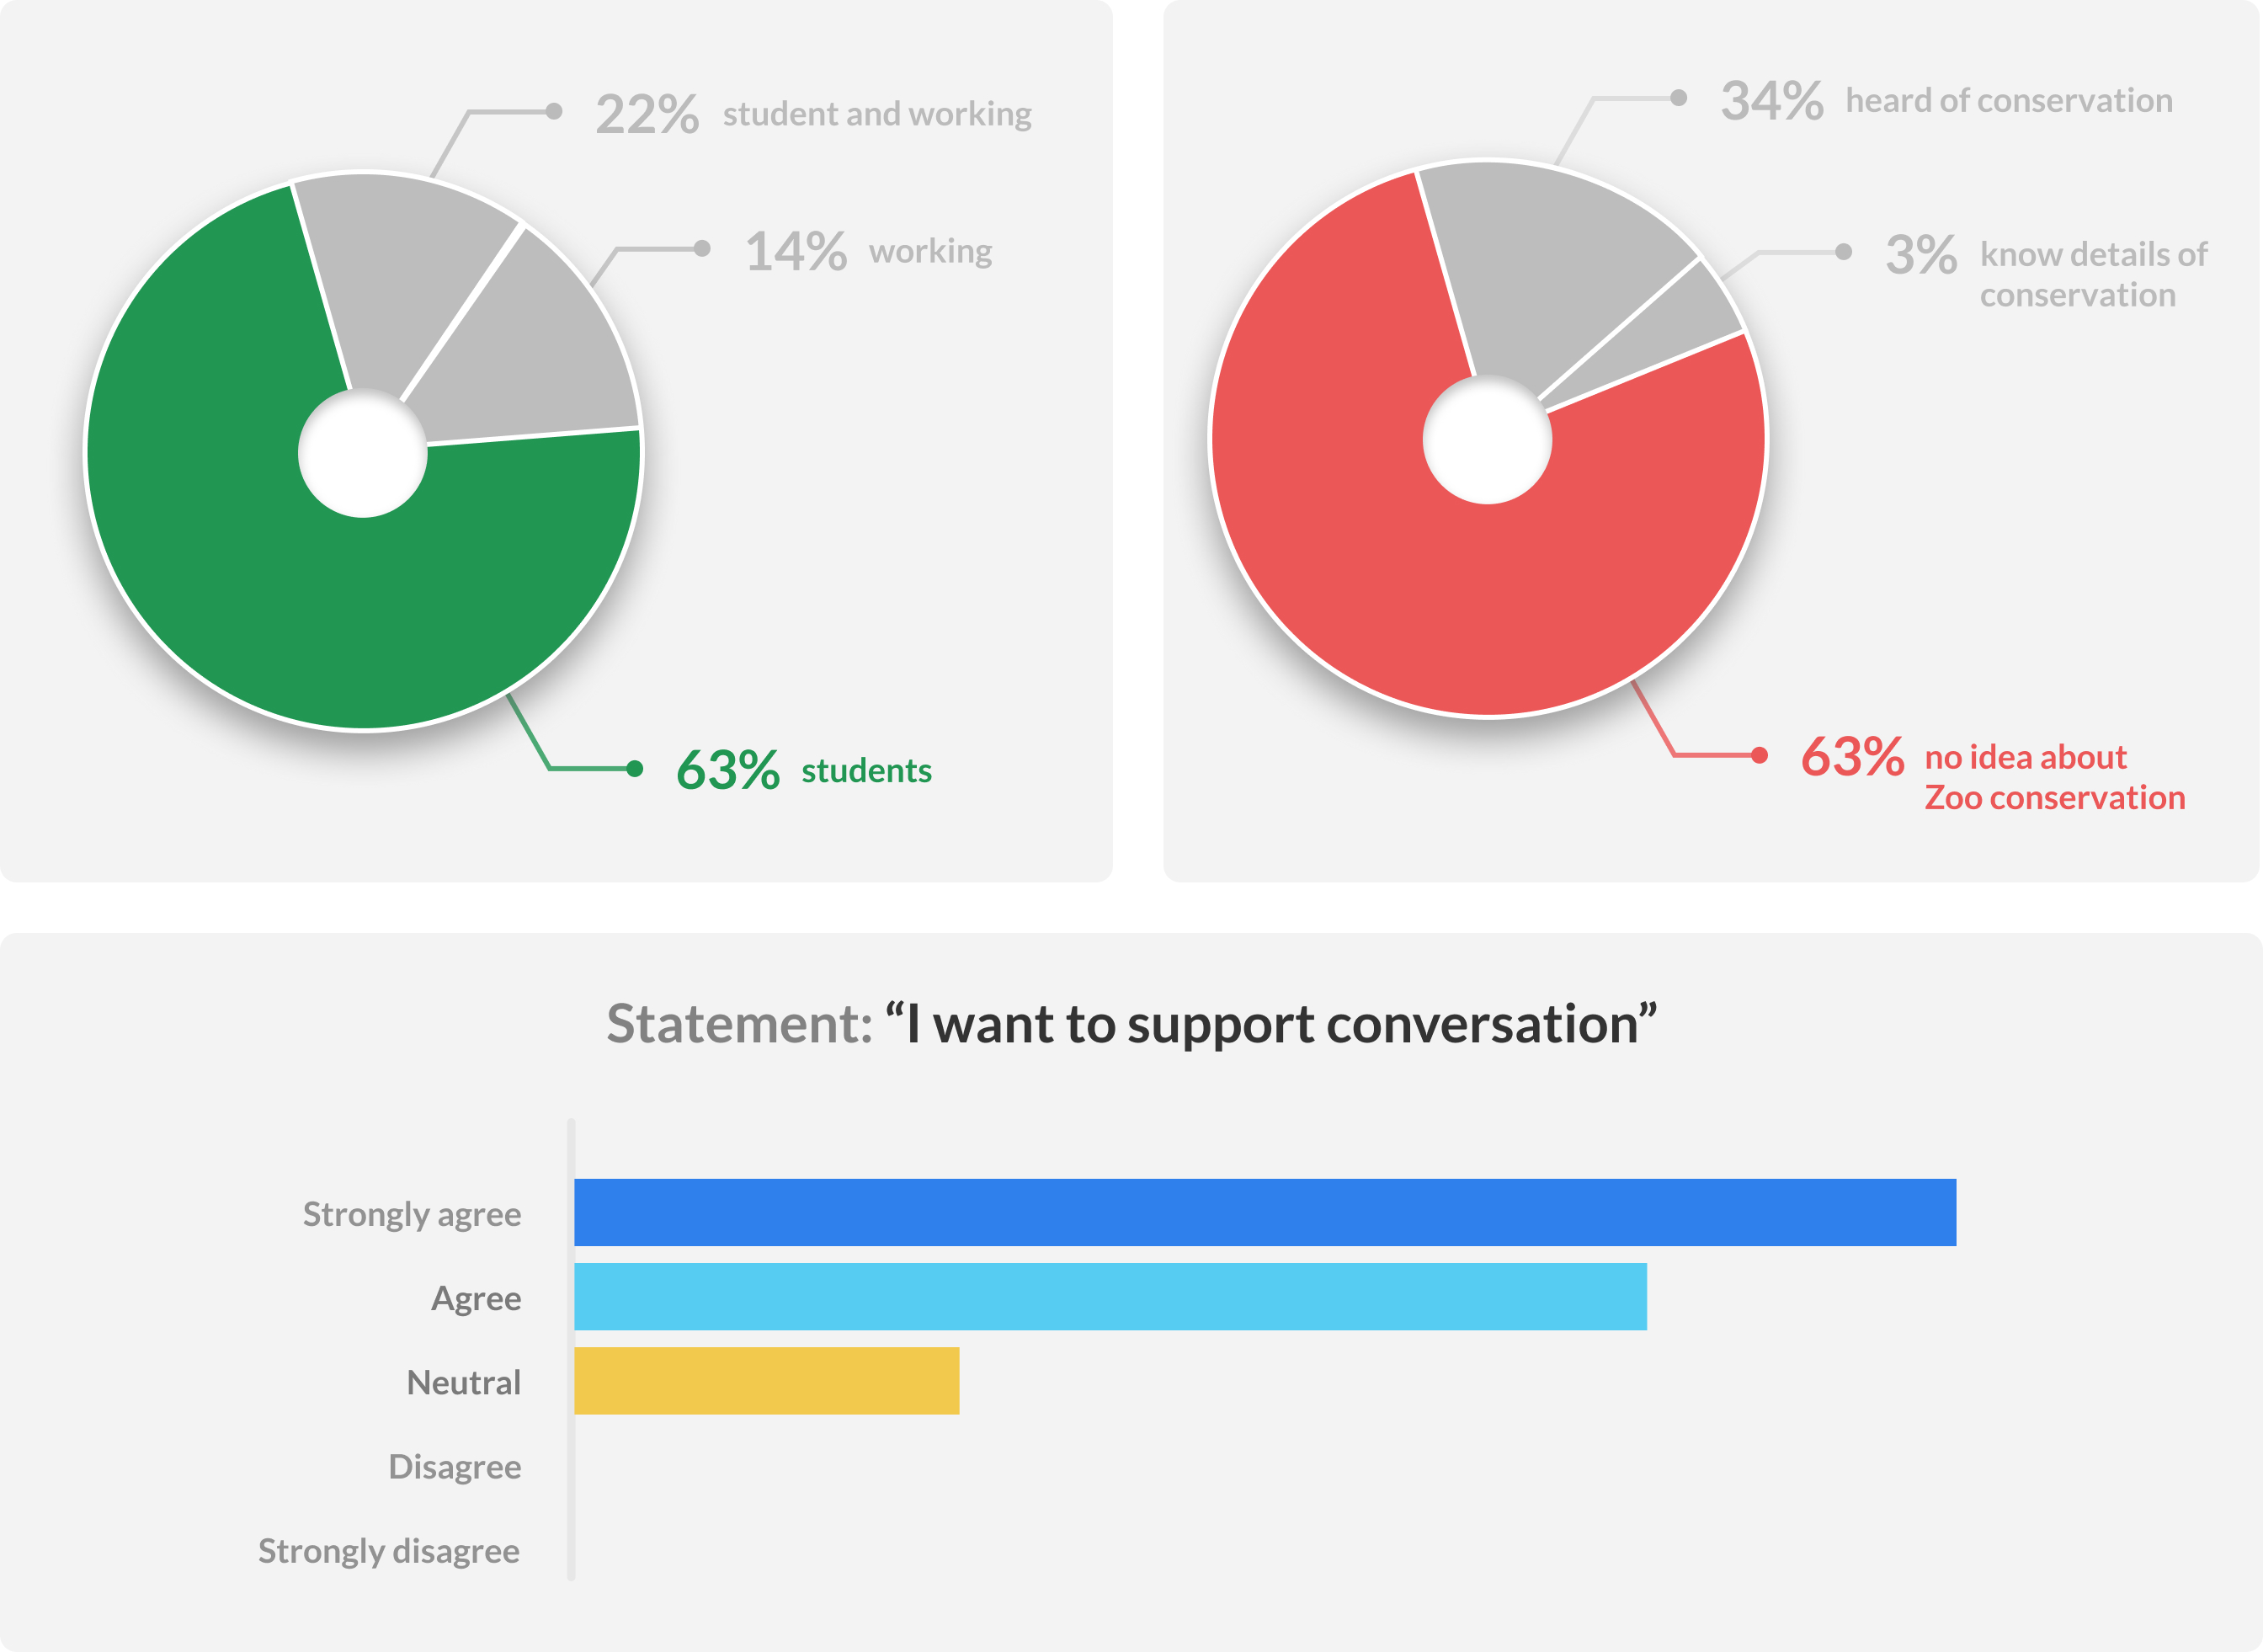 Images: Survey results